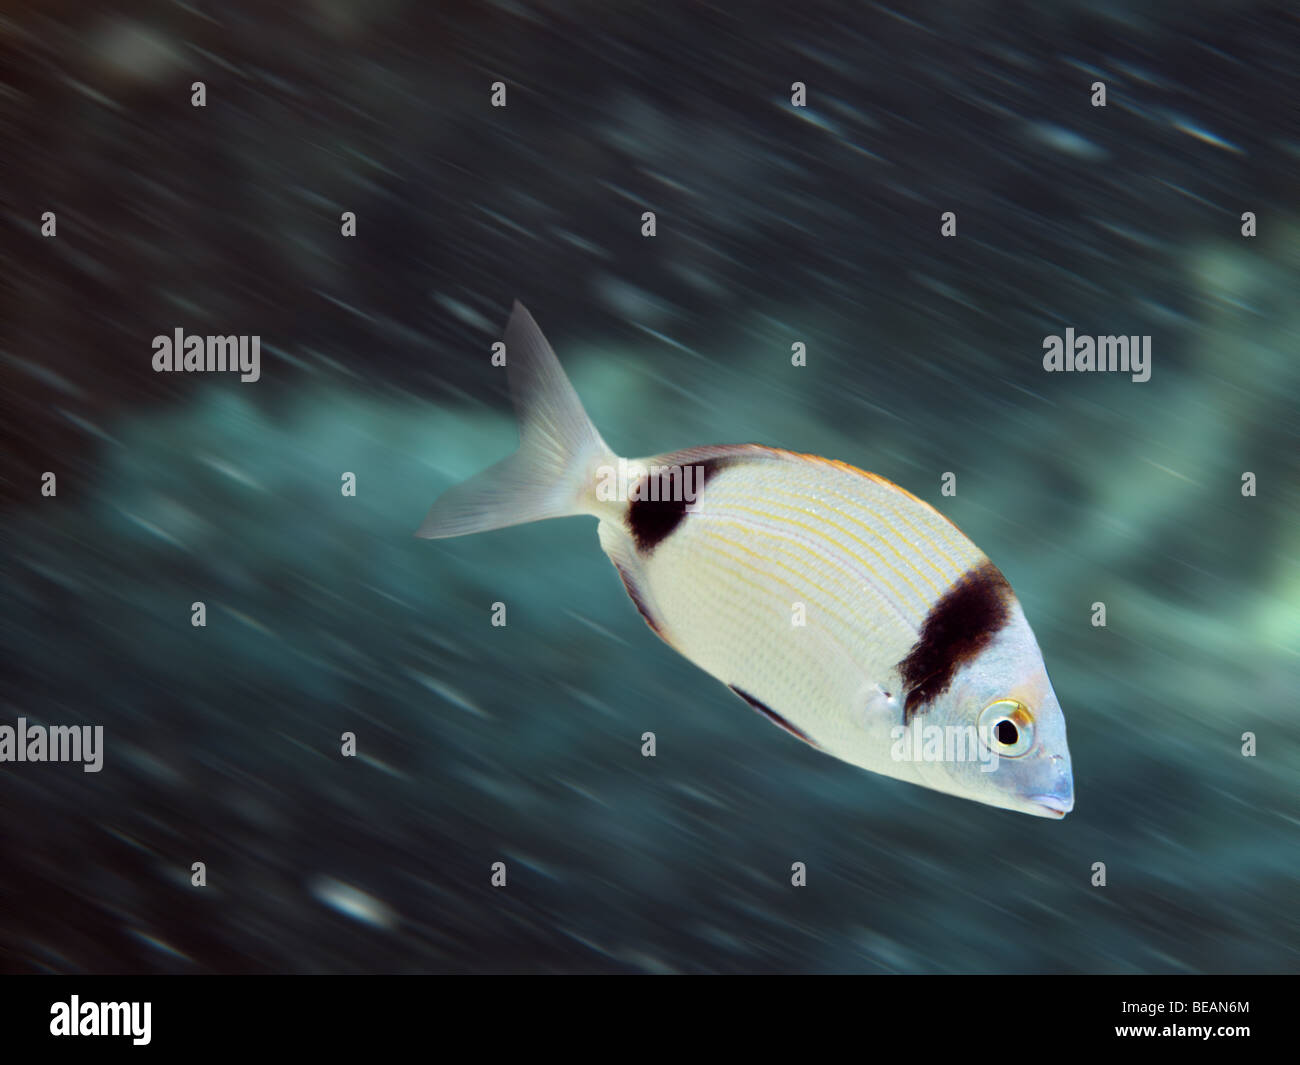 Common two-banded seabream fish Stock Photo